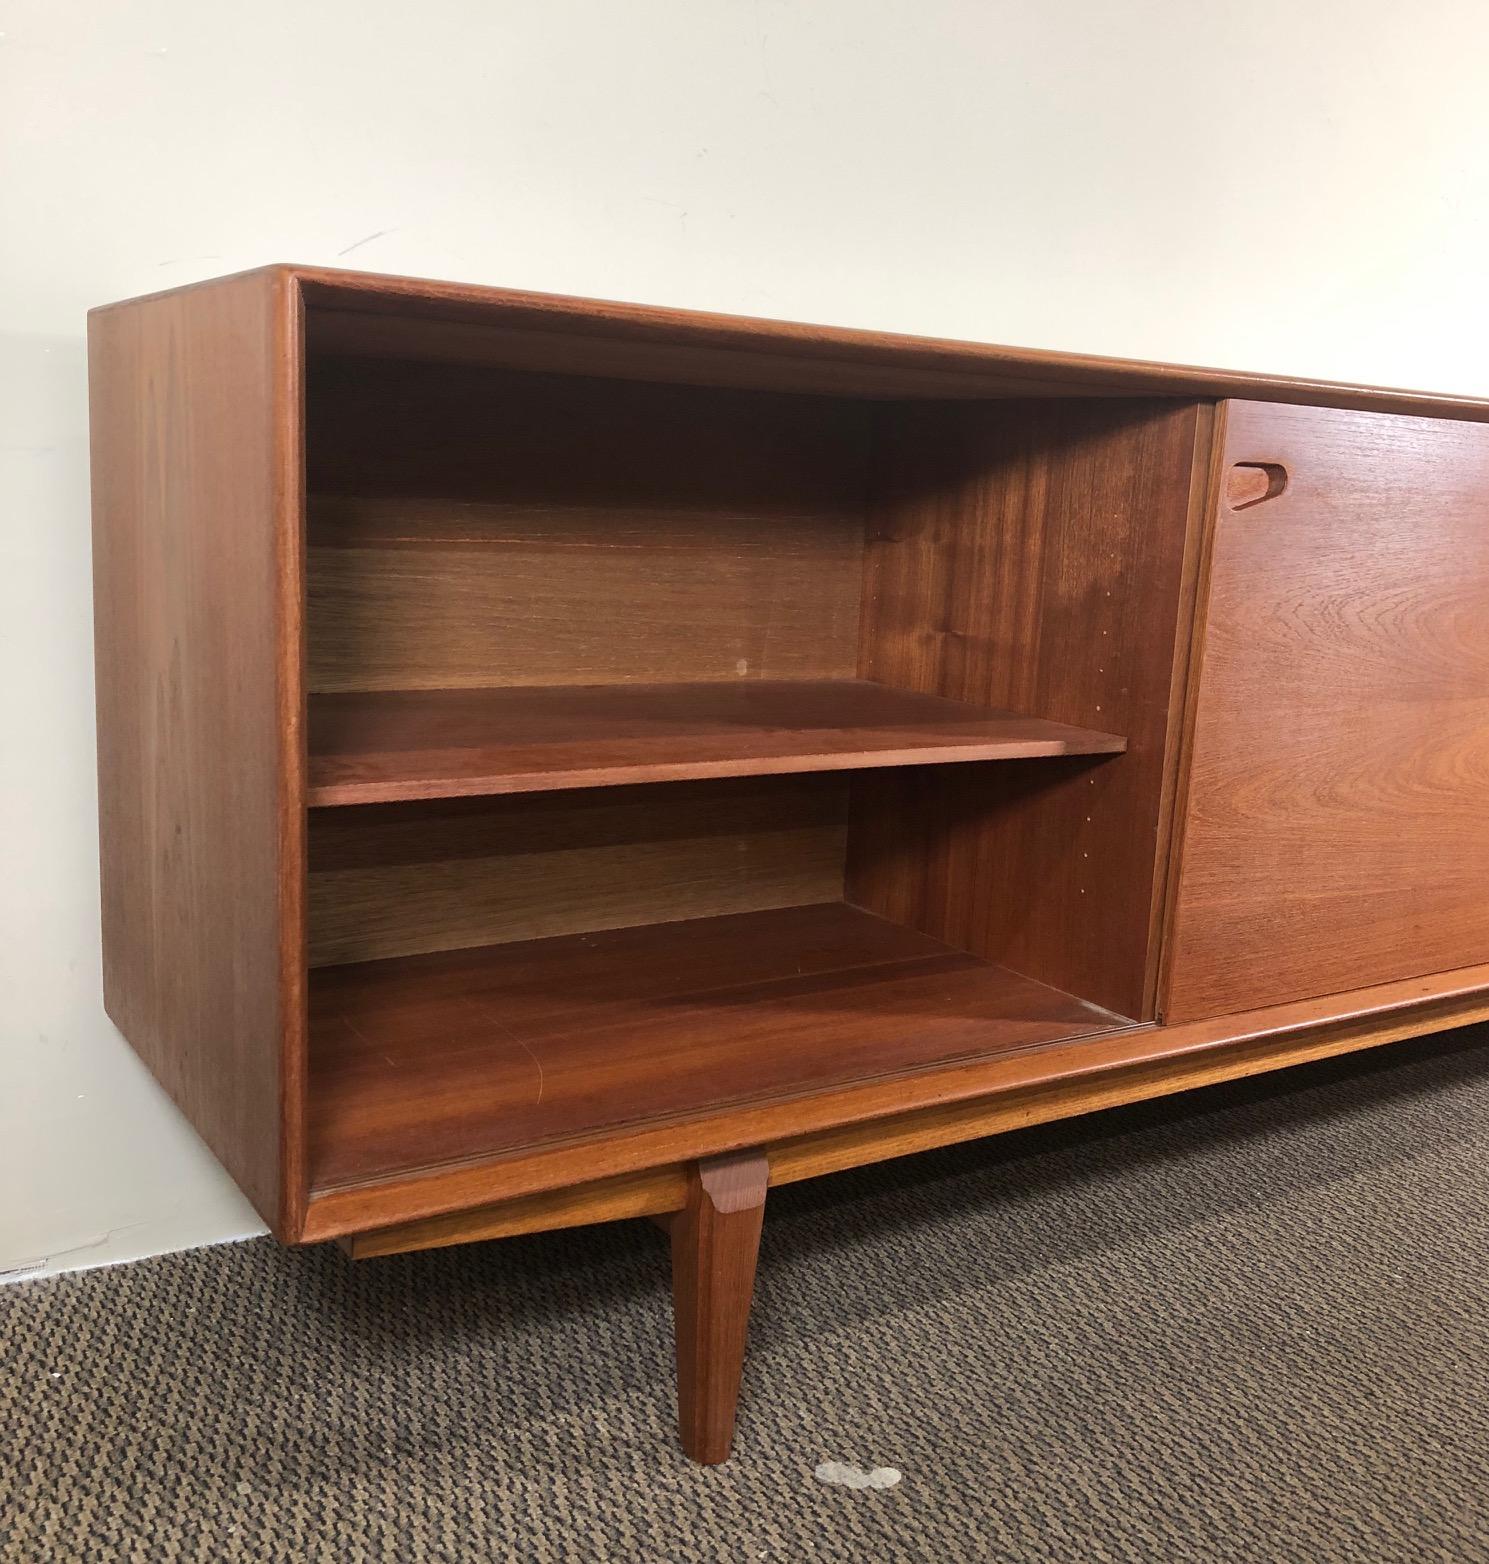 This is a beautiful Danish teak credenza with sliding doors with shelves and 5 center drawers.

Designed by Rosengren Hansen and made by Dyrlund. Made in Denmark. Original manufacturer label inside the credenza.

Very good unaltered original